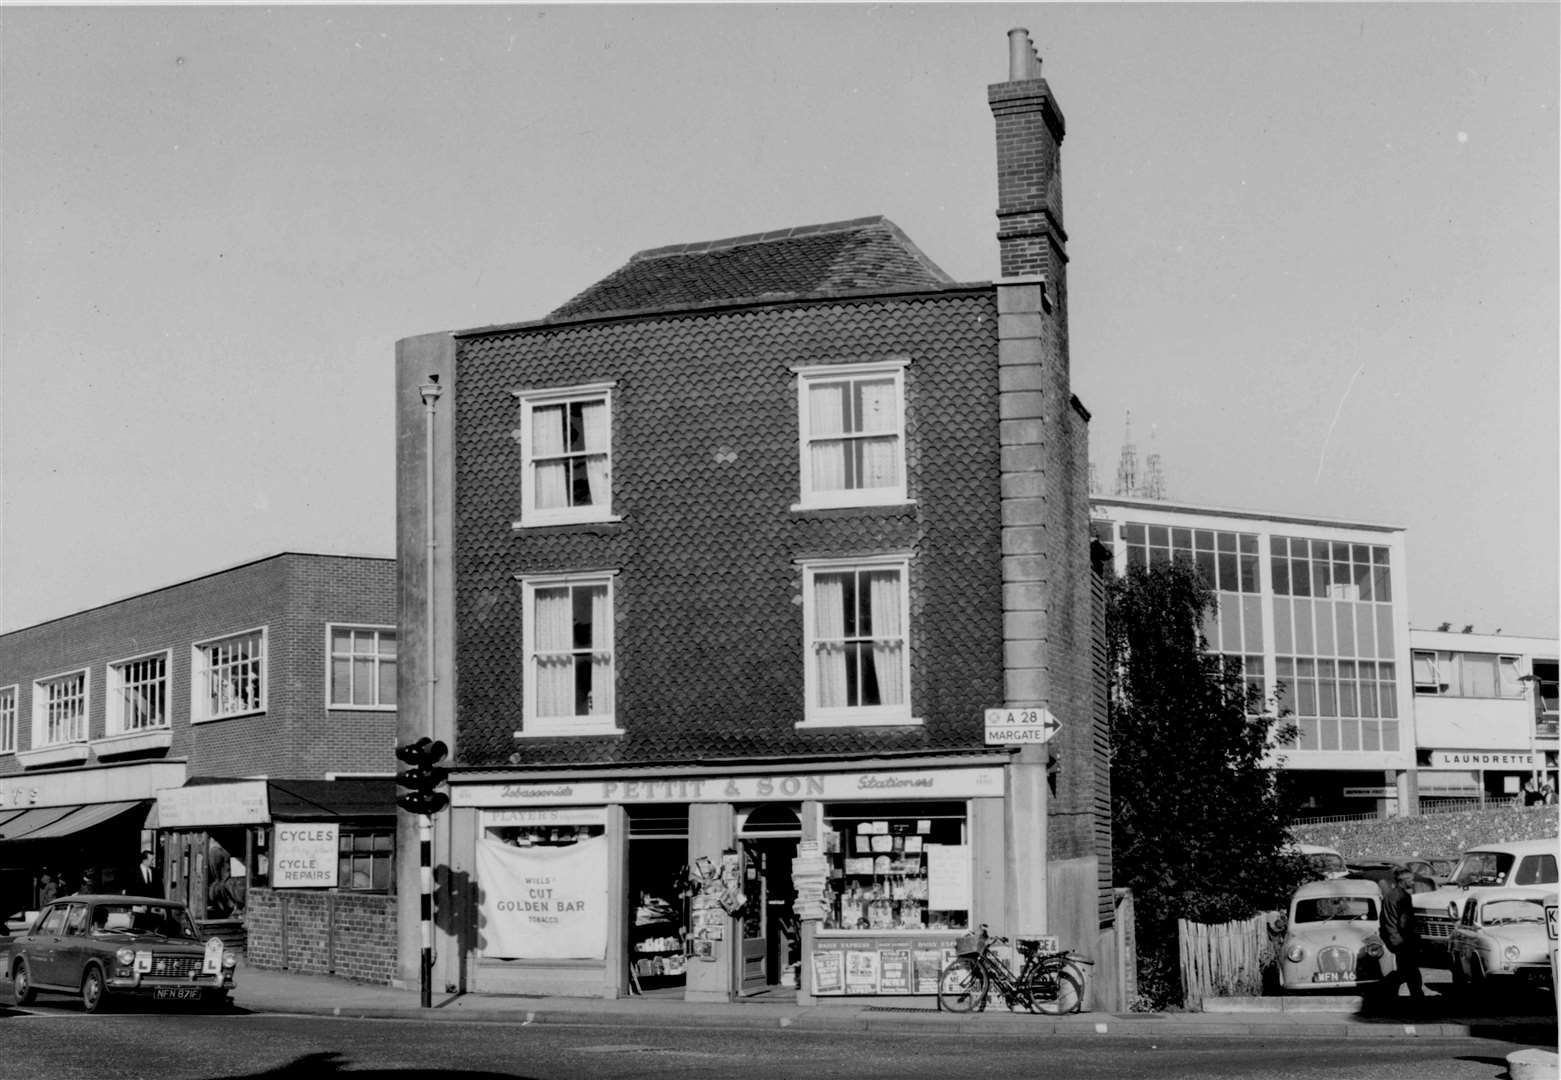 Canterbury newsagent and tobacconist Eric Pettit moved from St George's Gate, where the family business had been for 118 years, to Burgate to make way for the second stage of the ring-road in 1968